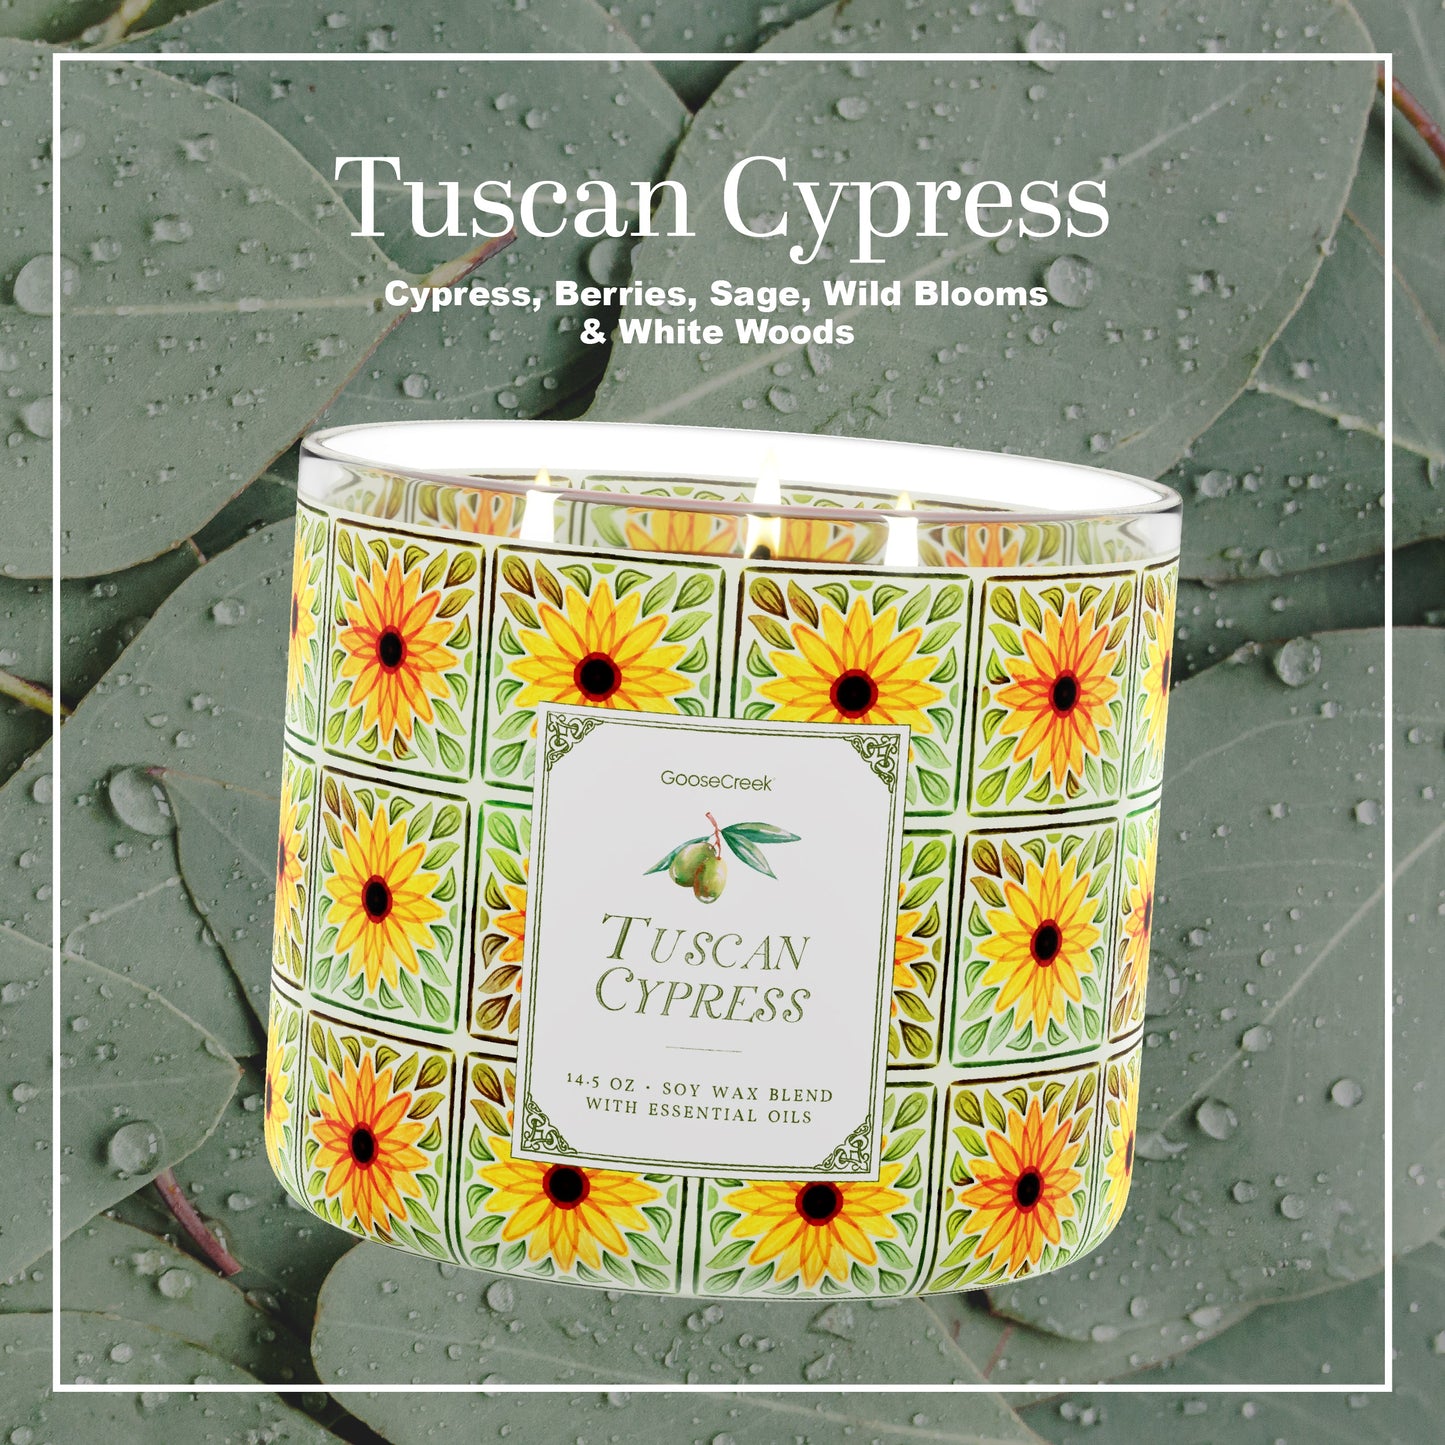 Tuscan Cypress Large 3-Wick Candle